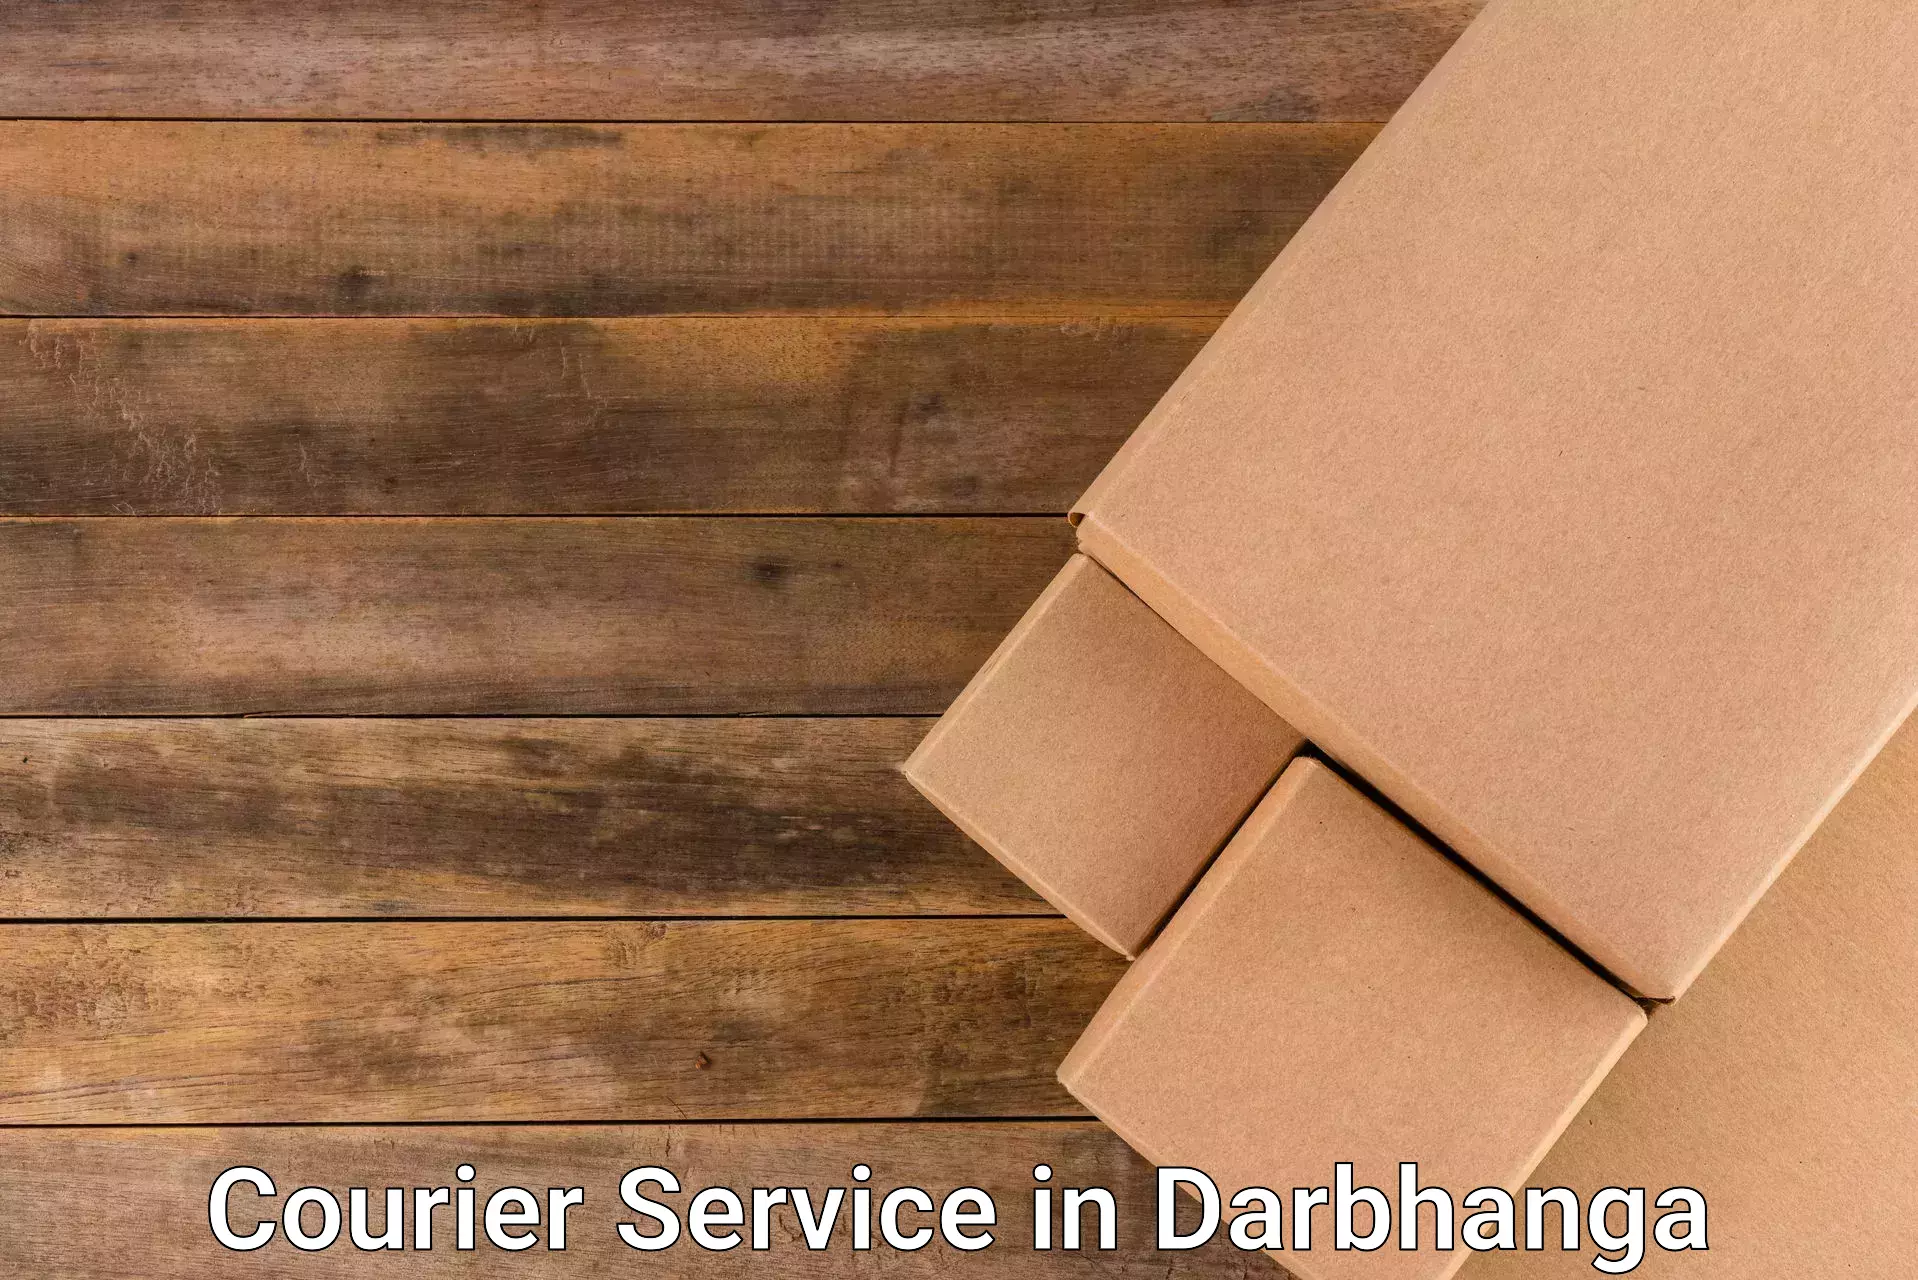 High value parcel delivery in Darbhanga